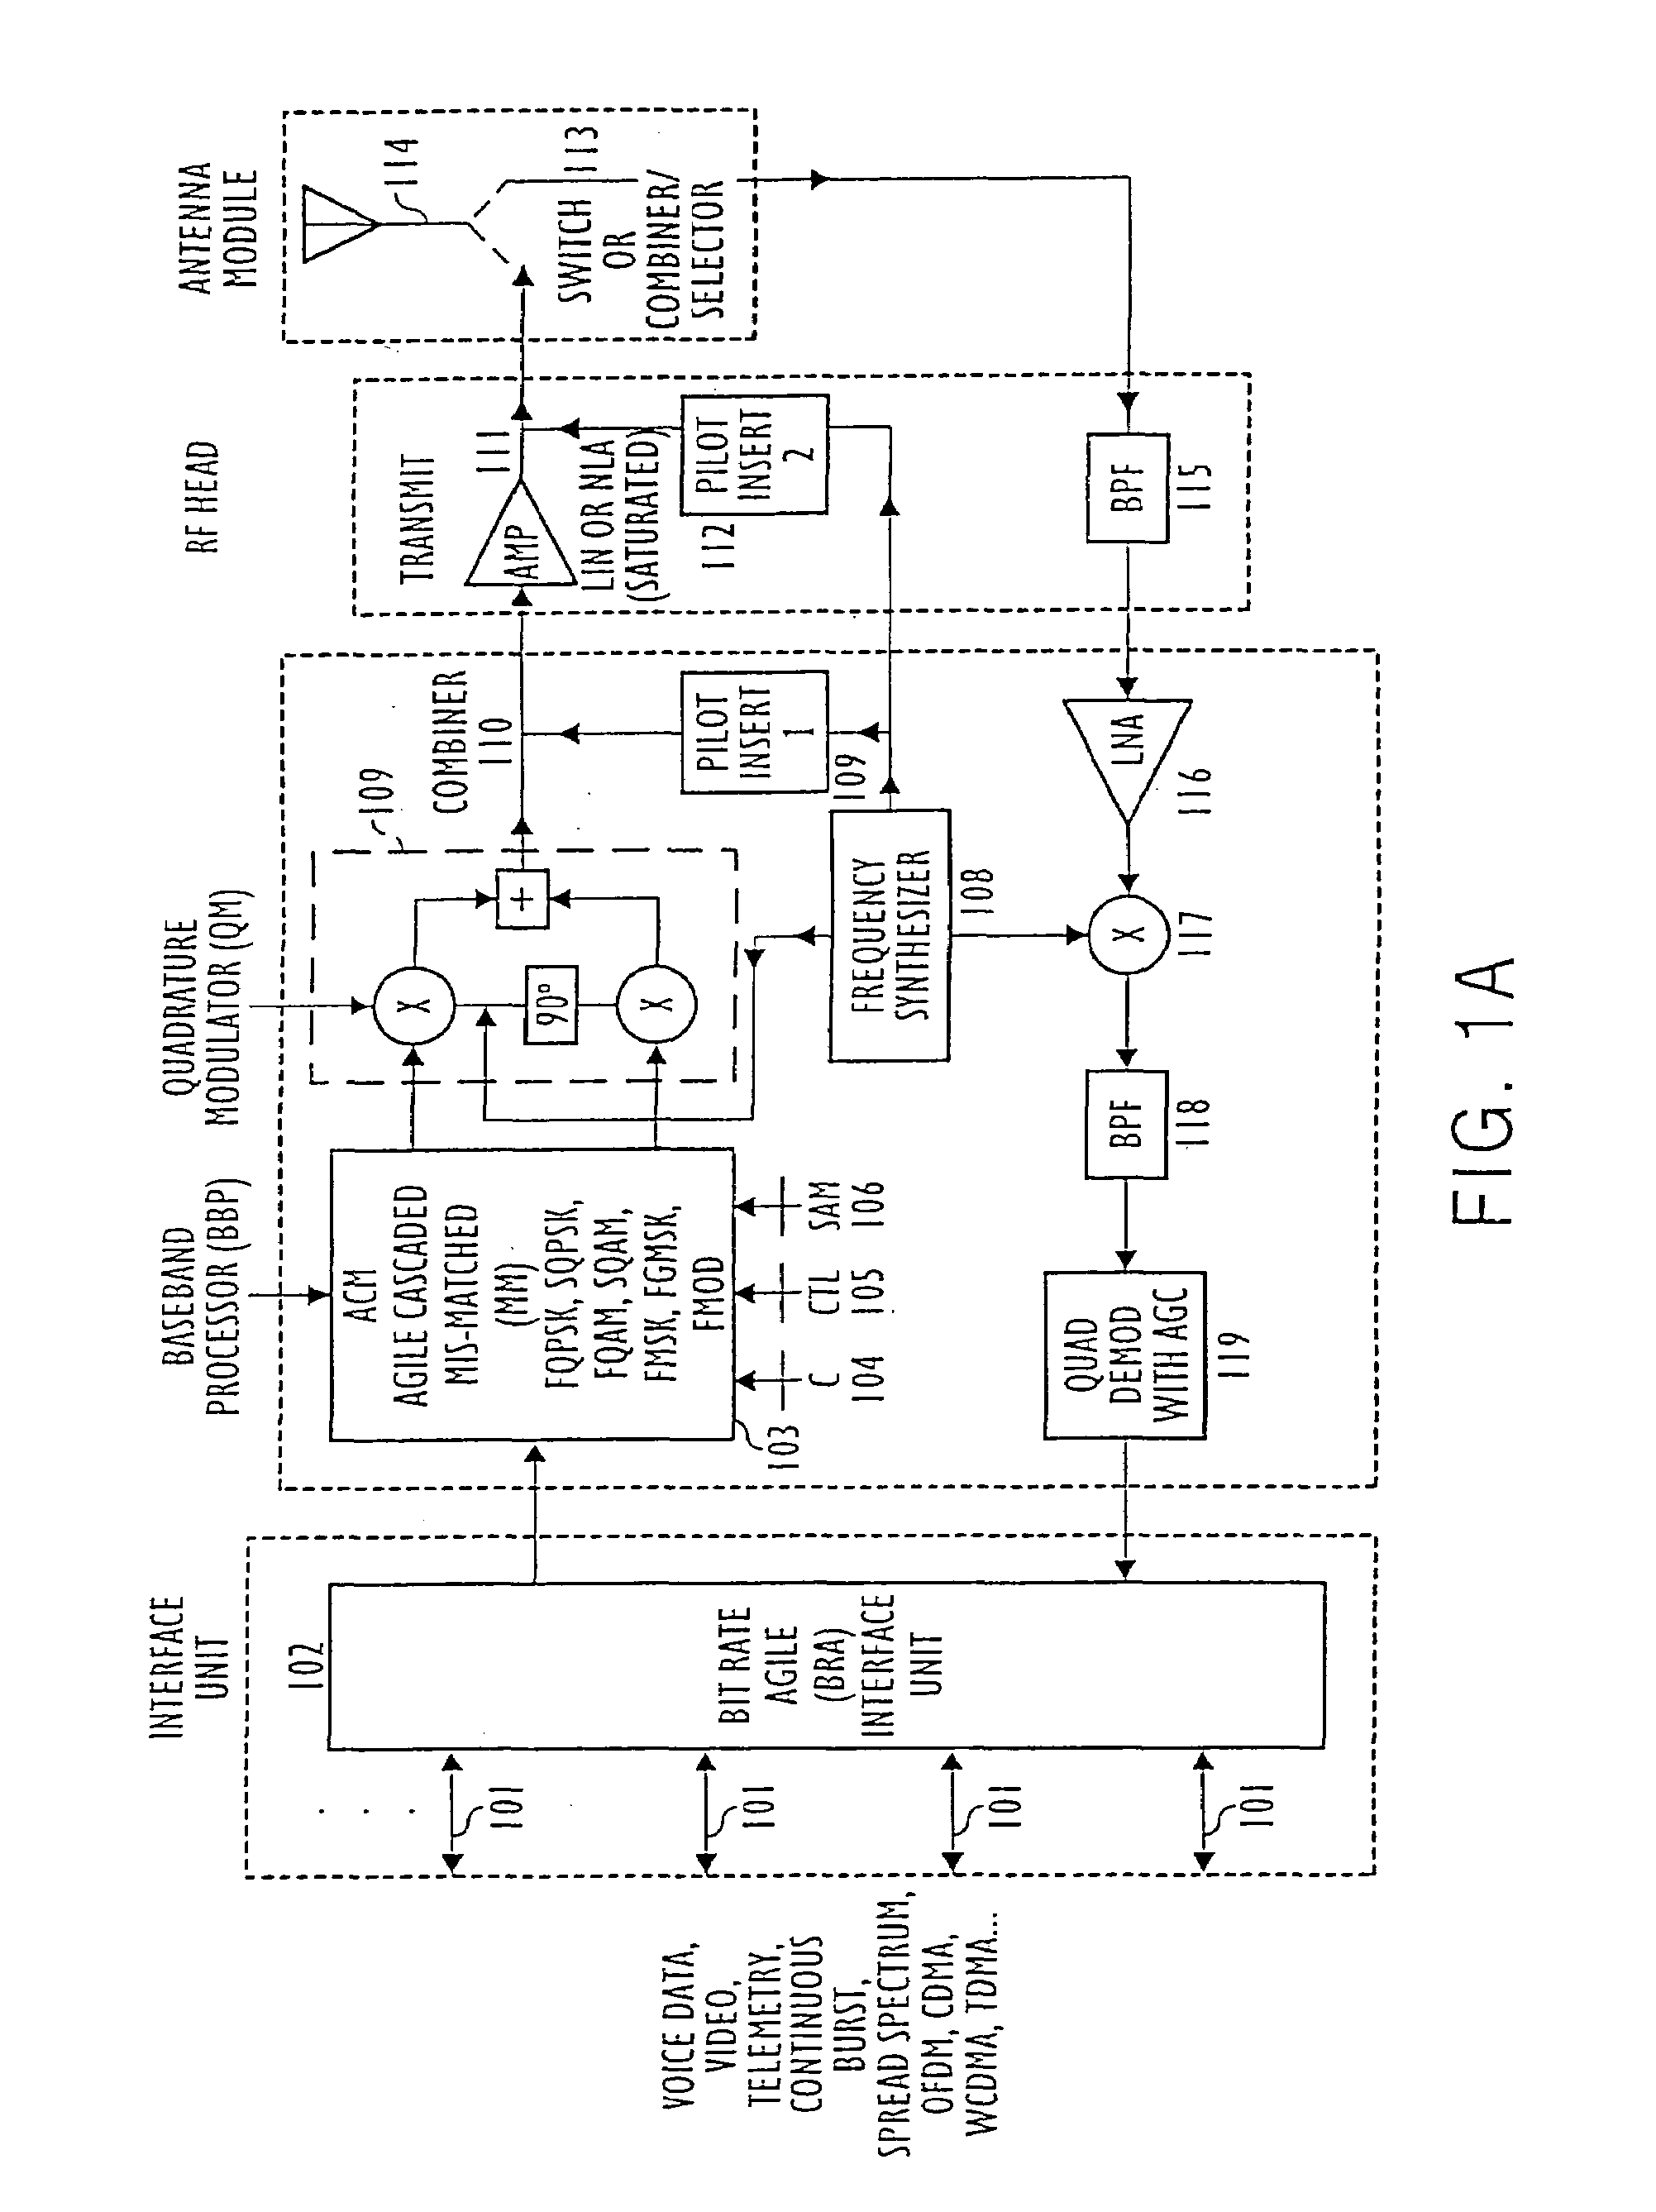 Modulation and demodulation format selectable system